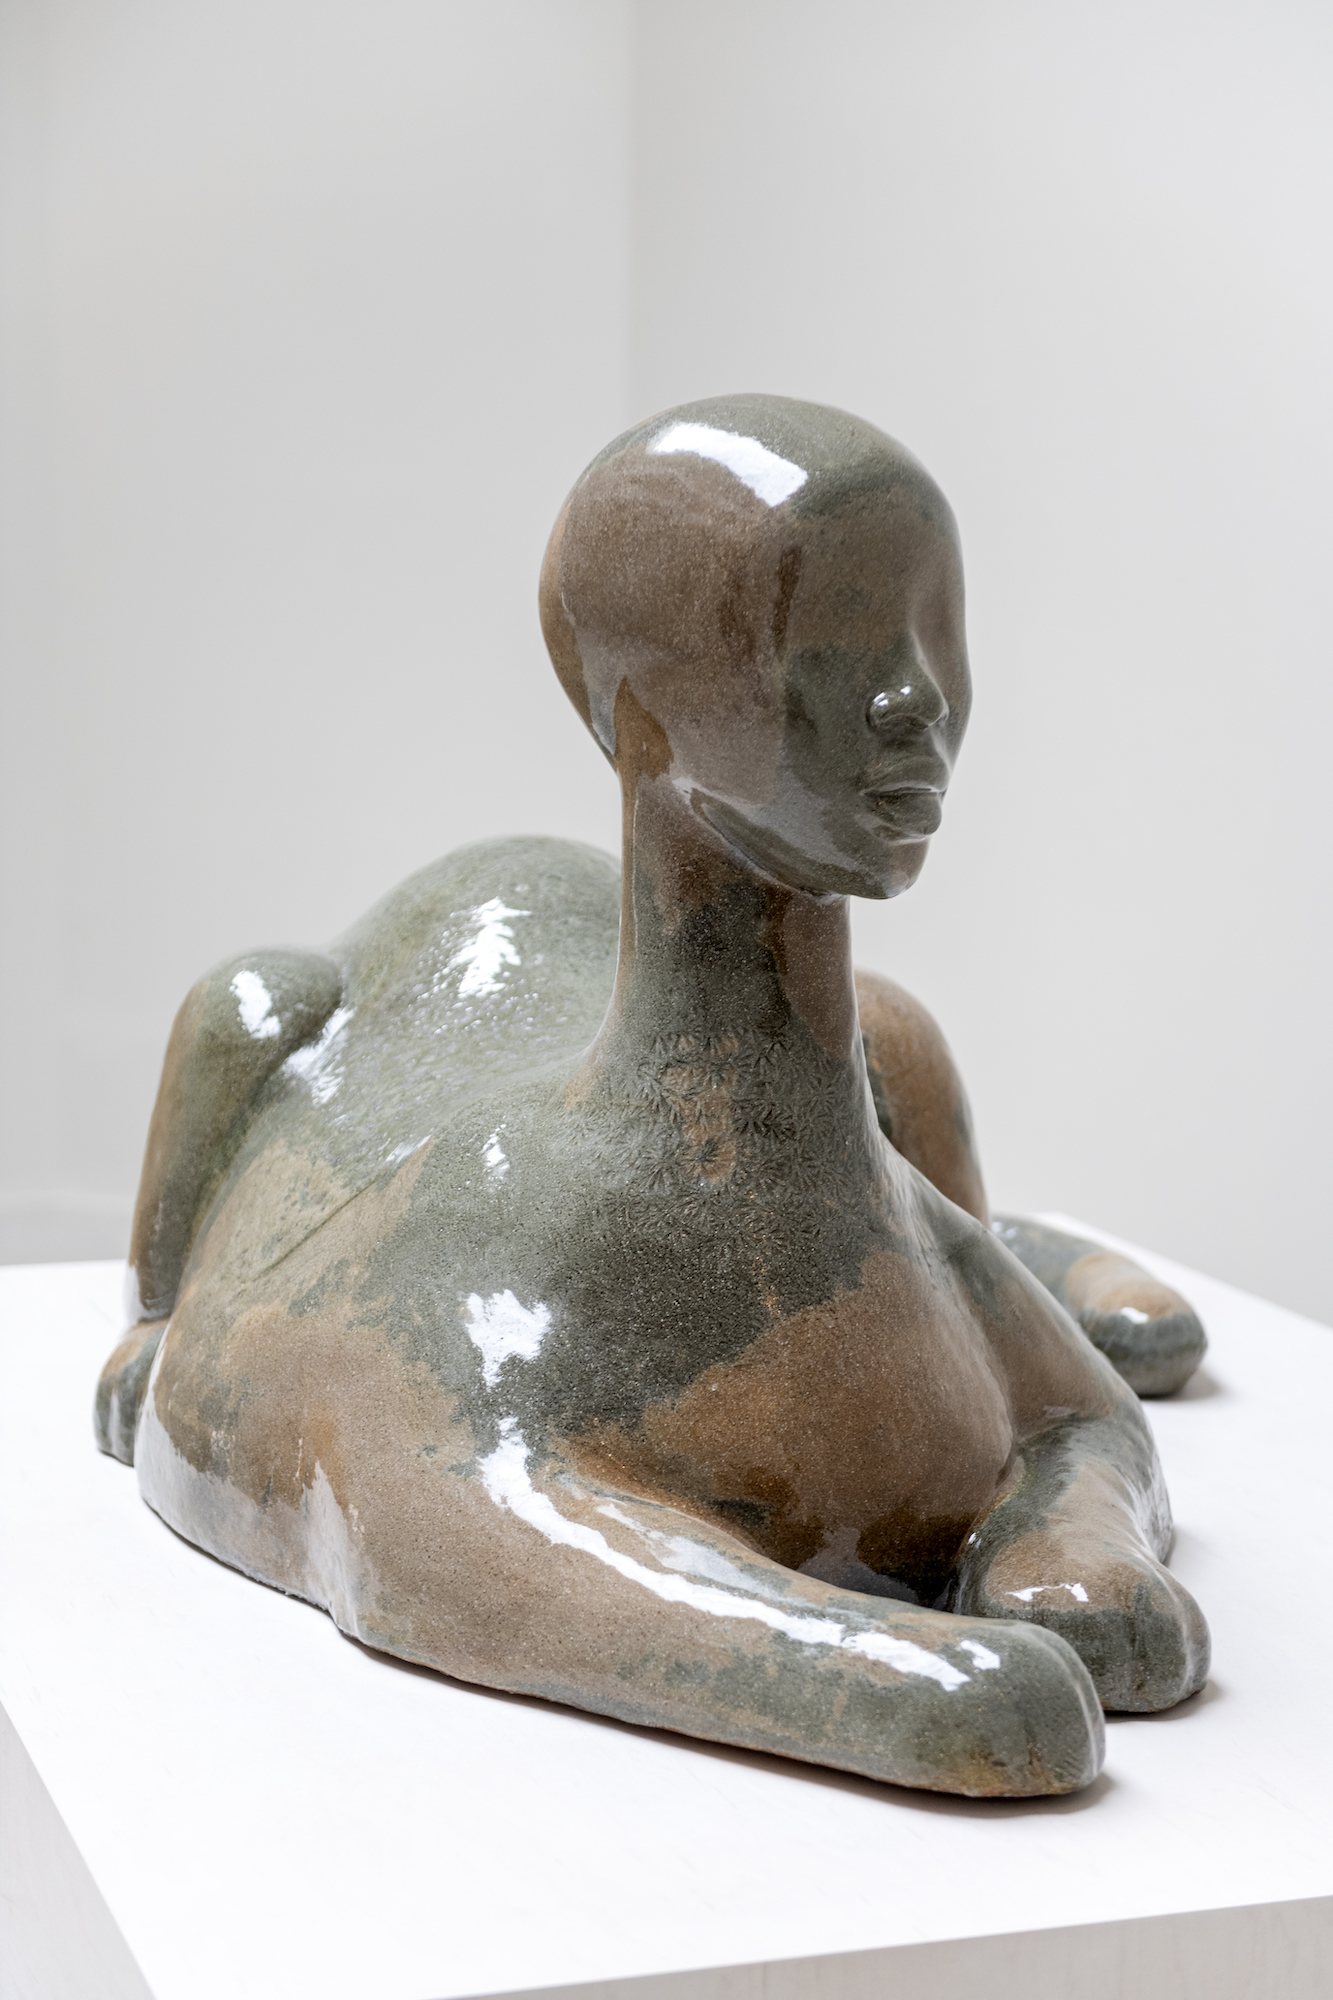 A shiny brown / green sculpture of a sphinx laying down atop a white pedestal.